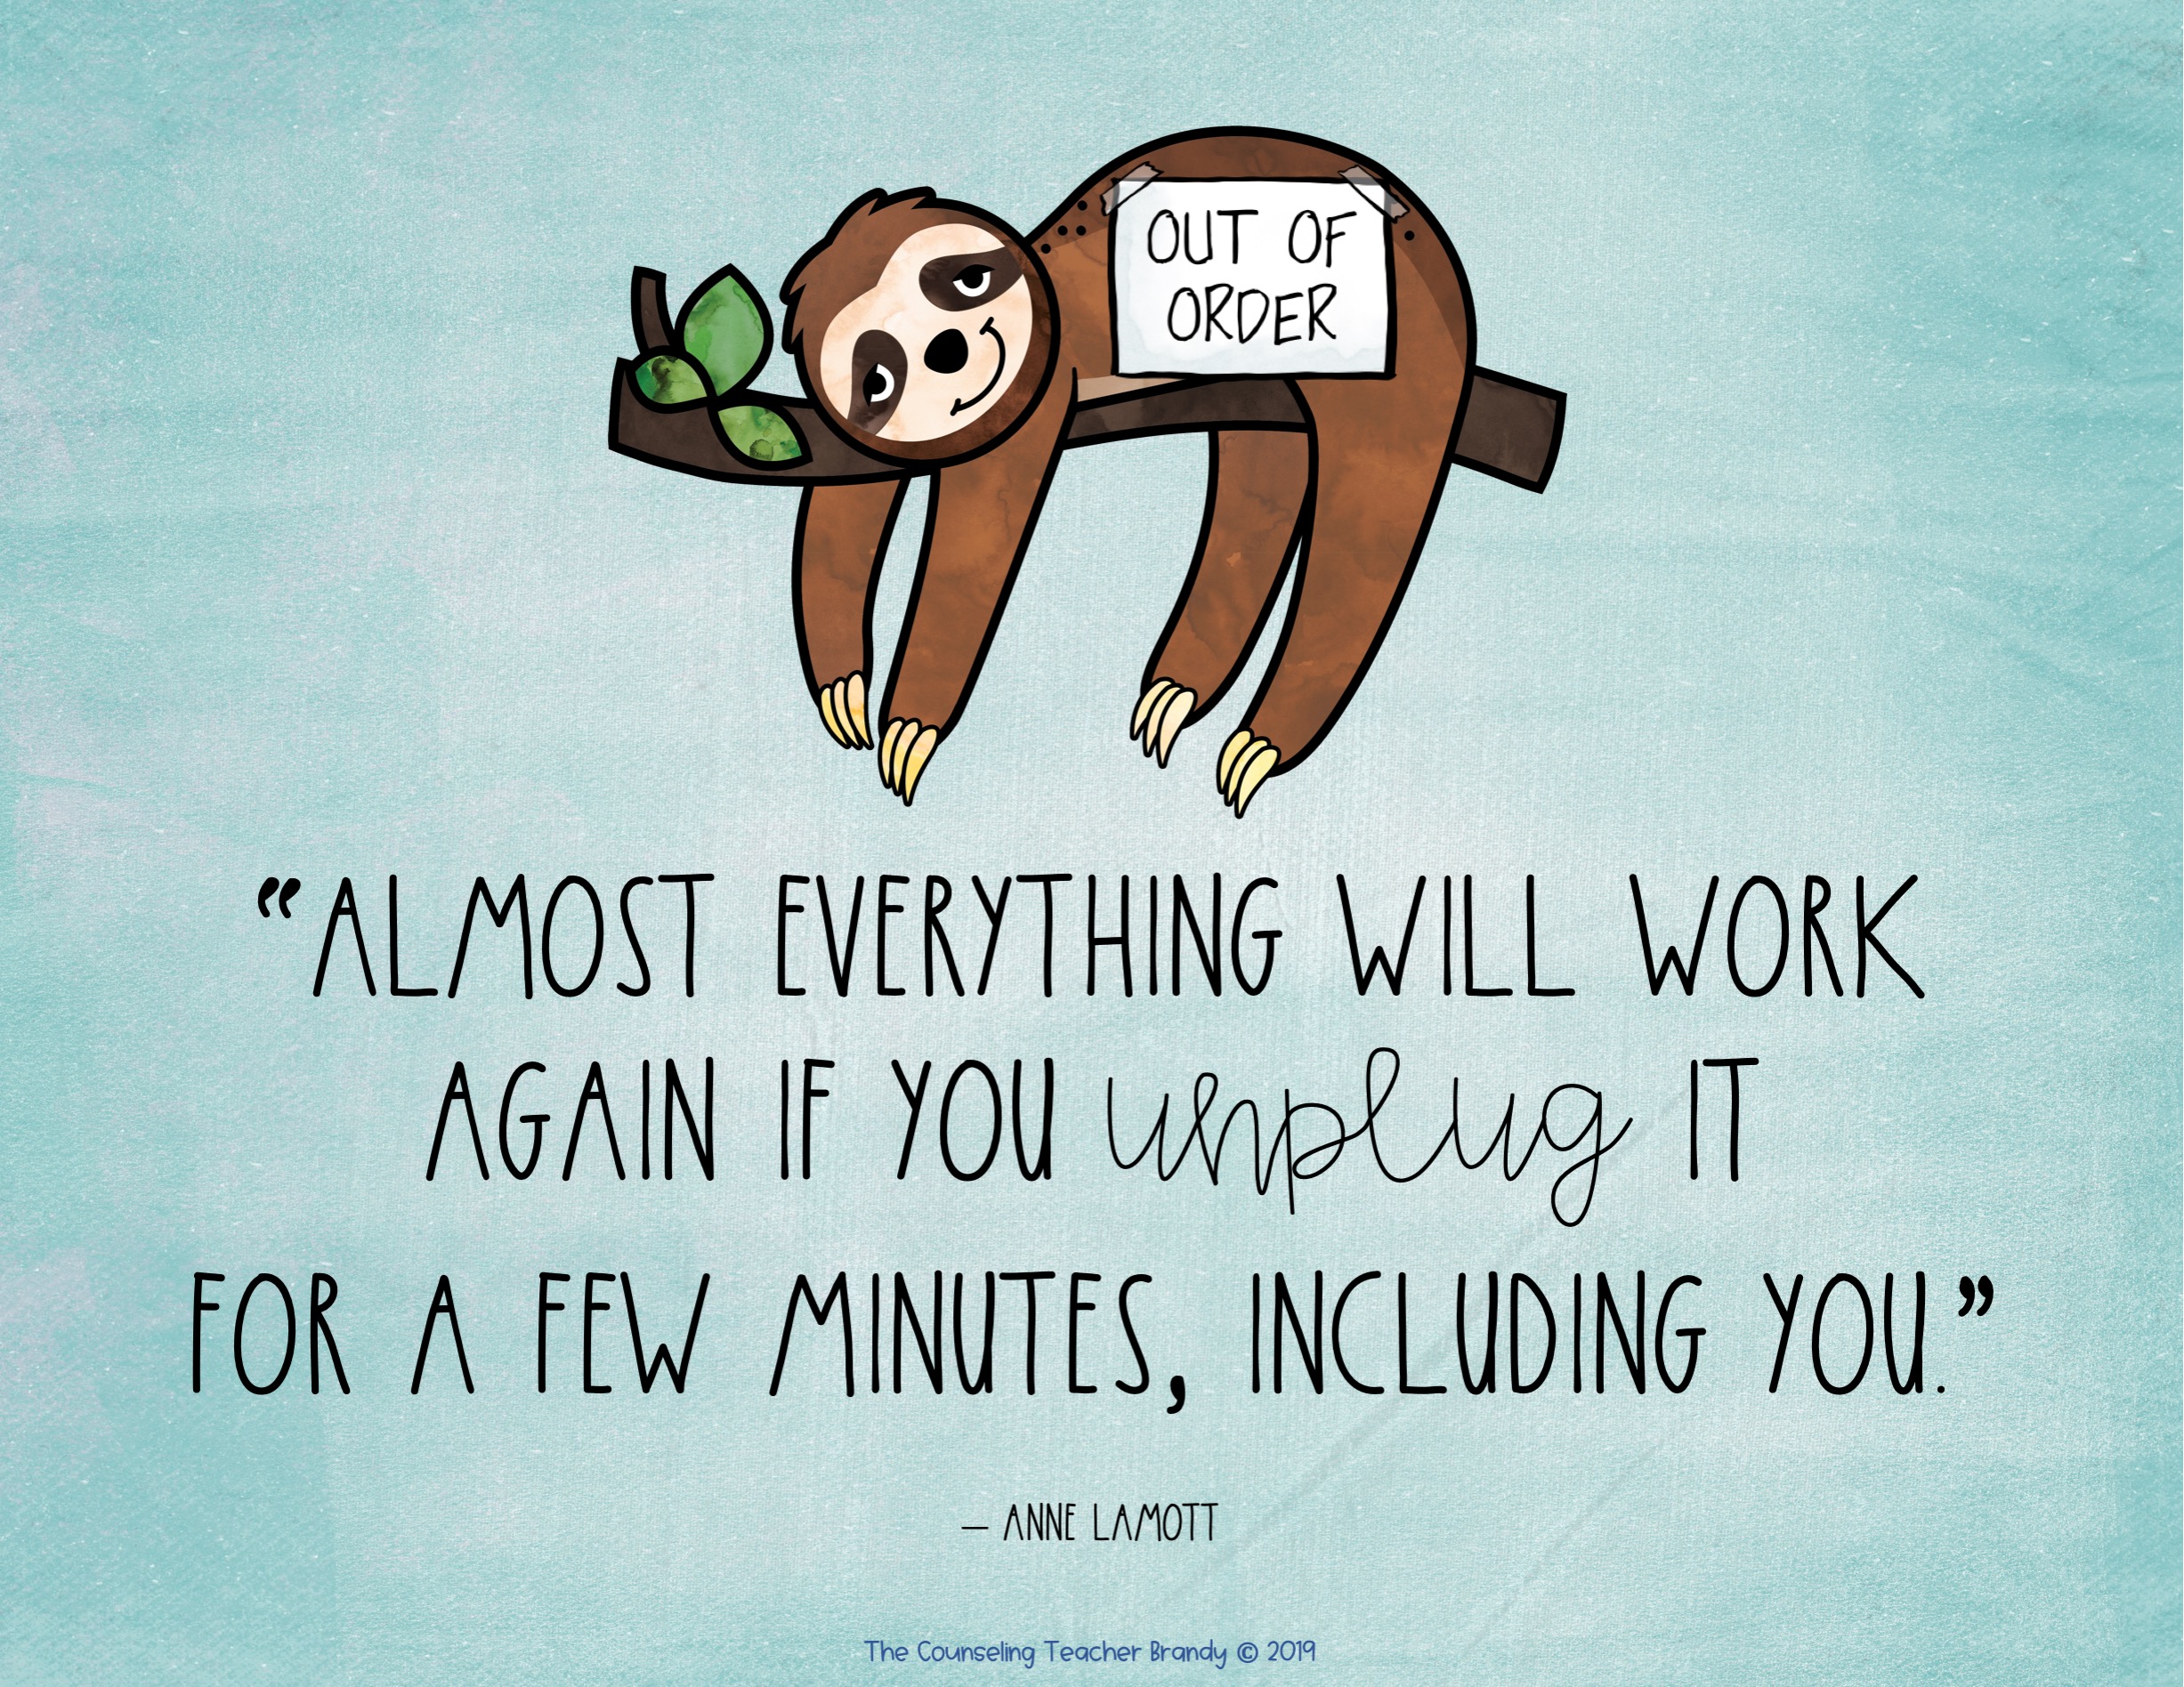 almost everything will work again if you unplug it for a few minutes including you. anne lamott